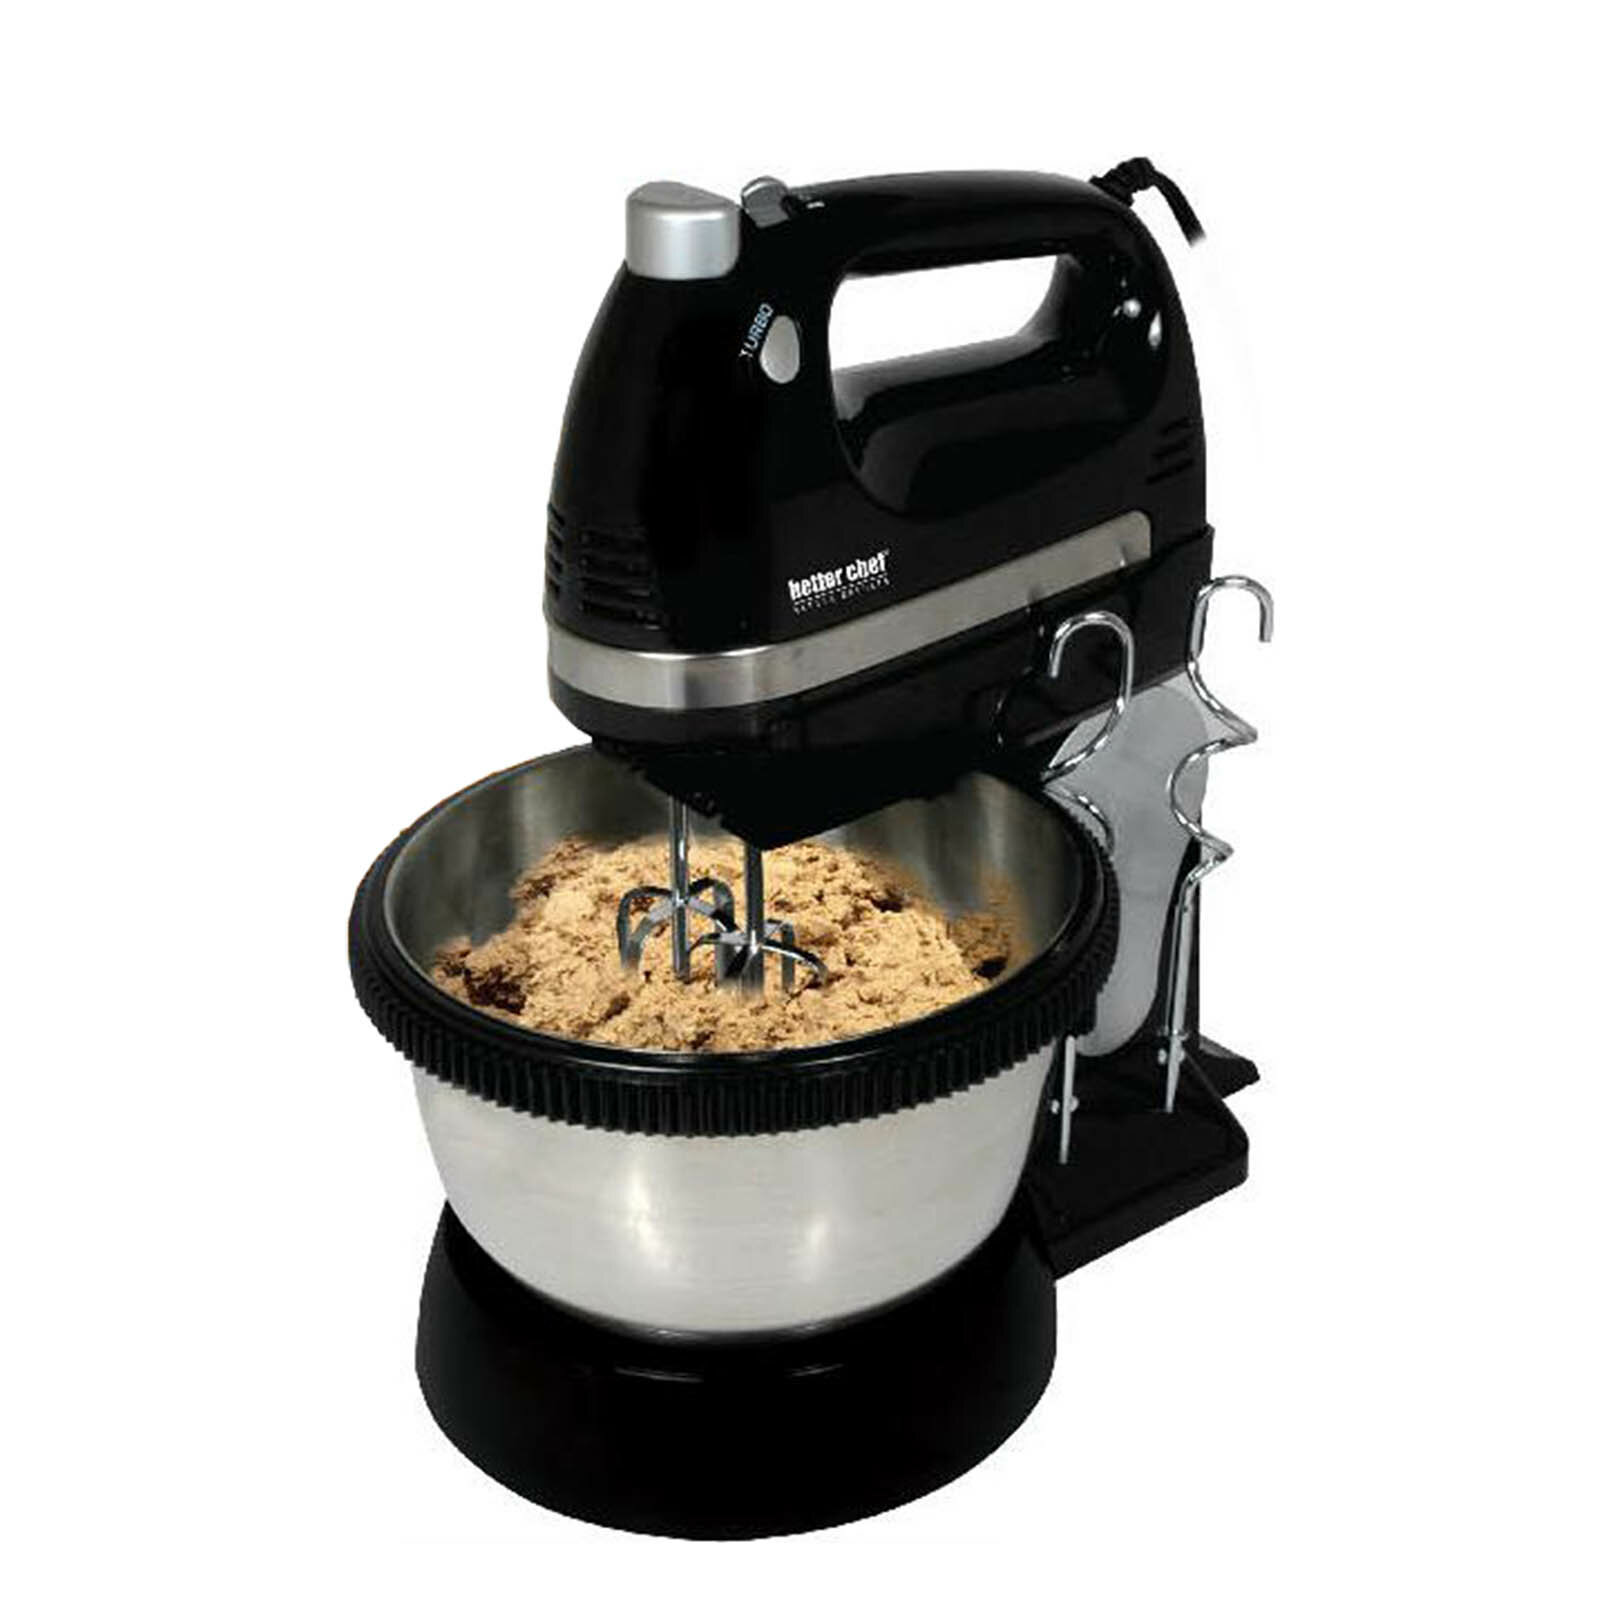 Better Chef 1.5-Quart 5-Speed White Residential Stand Mixer in the